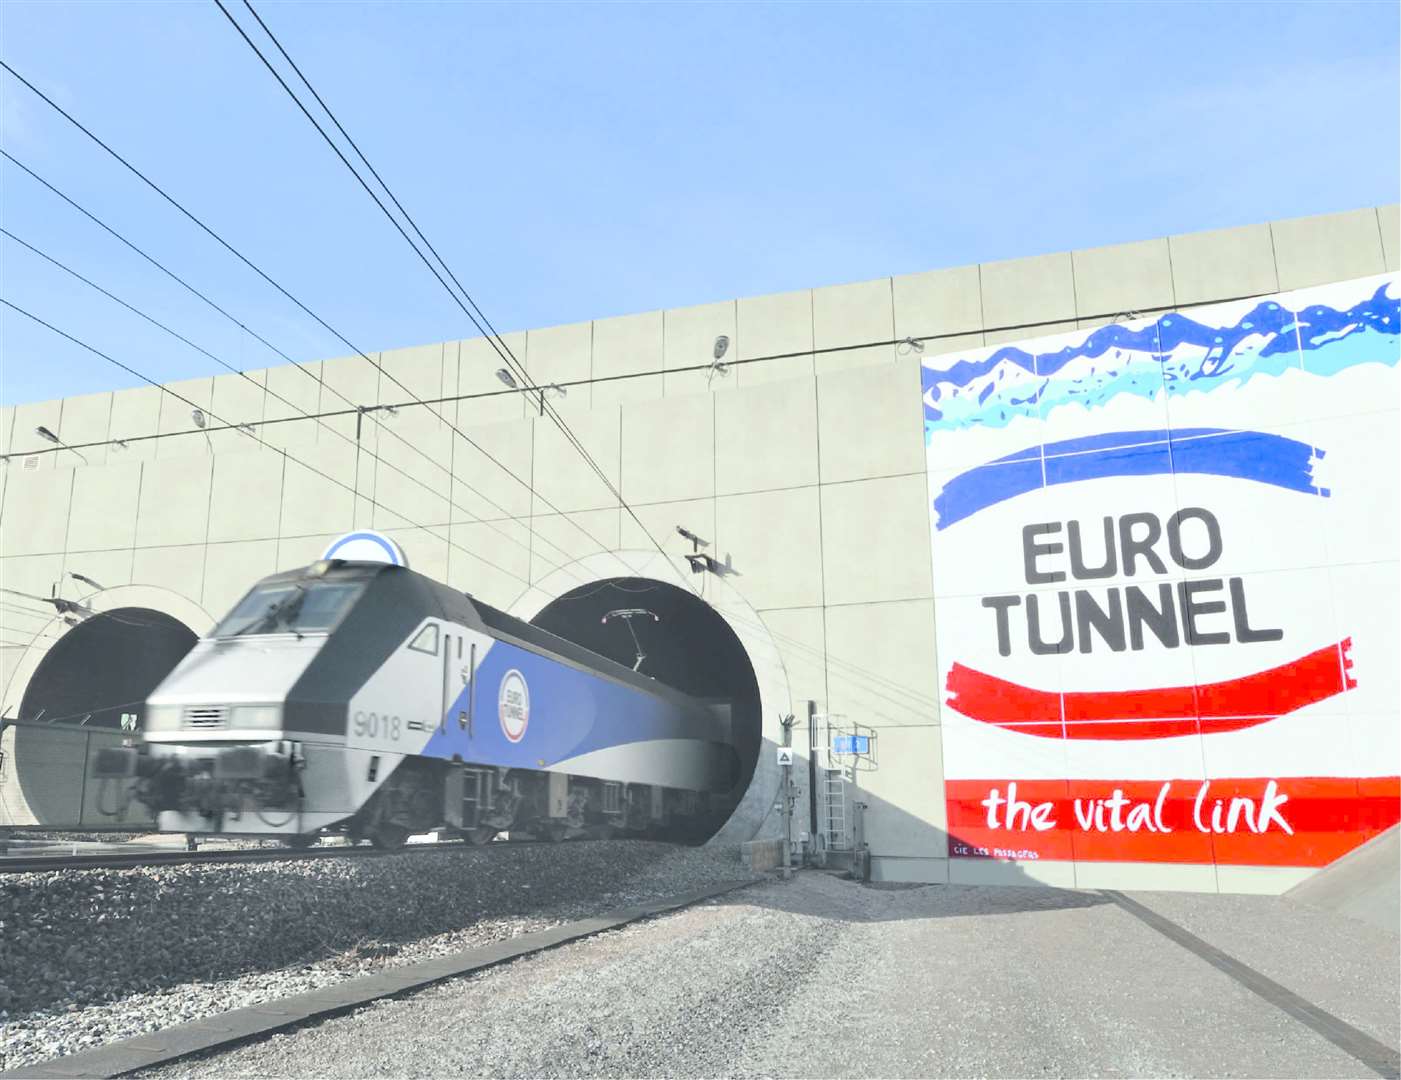 Eurotunnel saw a dip in traffic during June